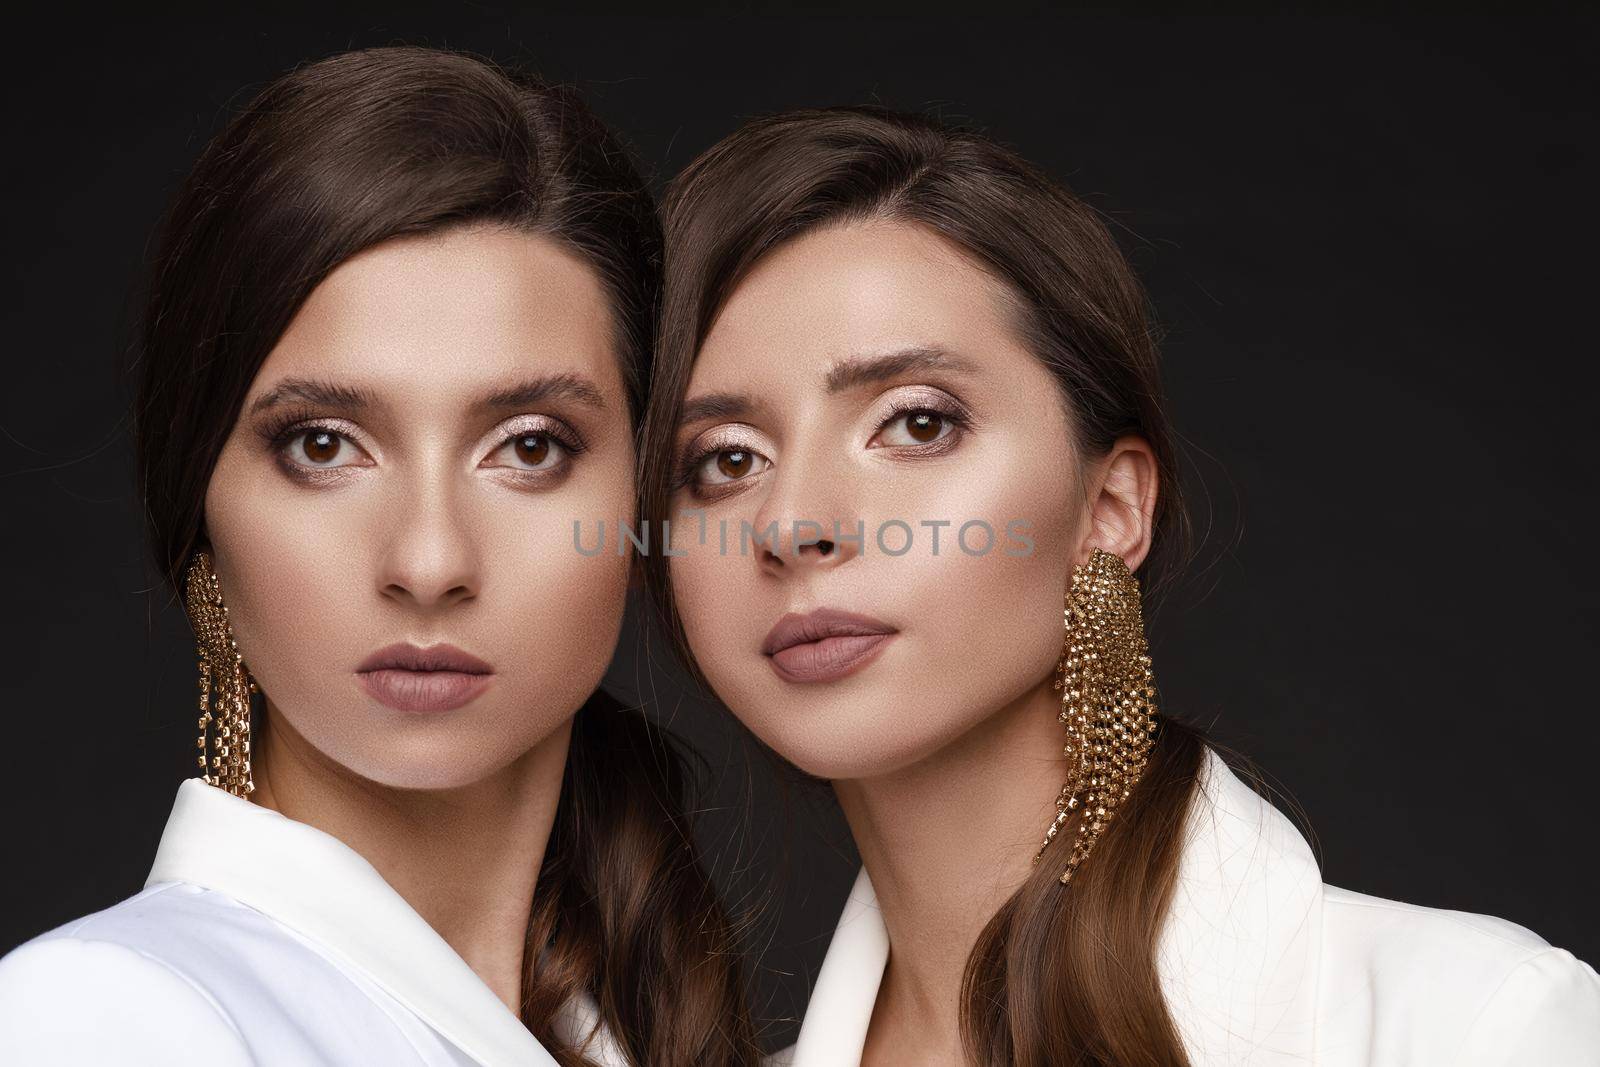 Portrait of two beautiful sisters with elegant make up. Brunette twins with long hair standing close to each other and looking seriously. Young models with big earrings posing together at camera.